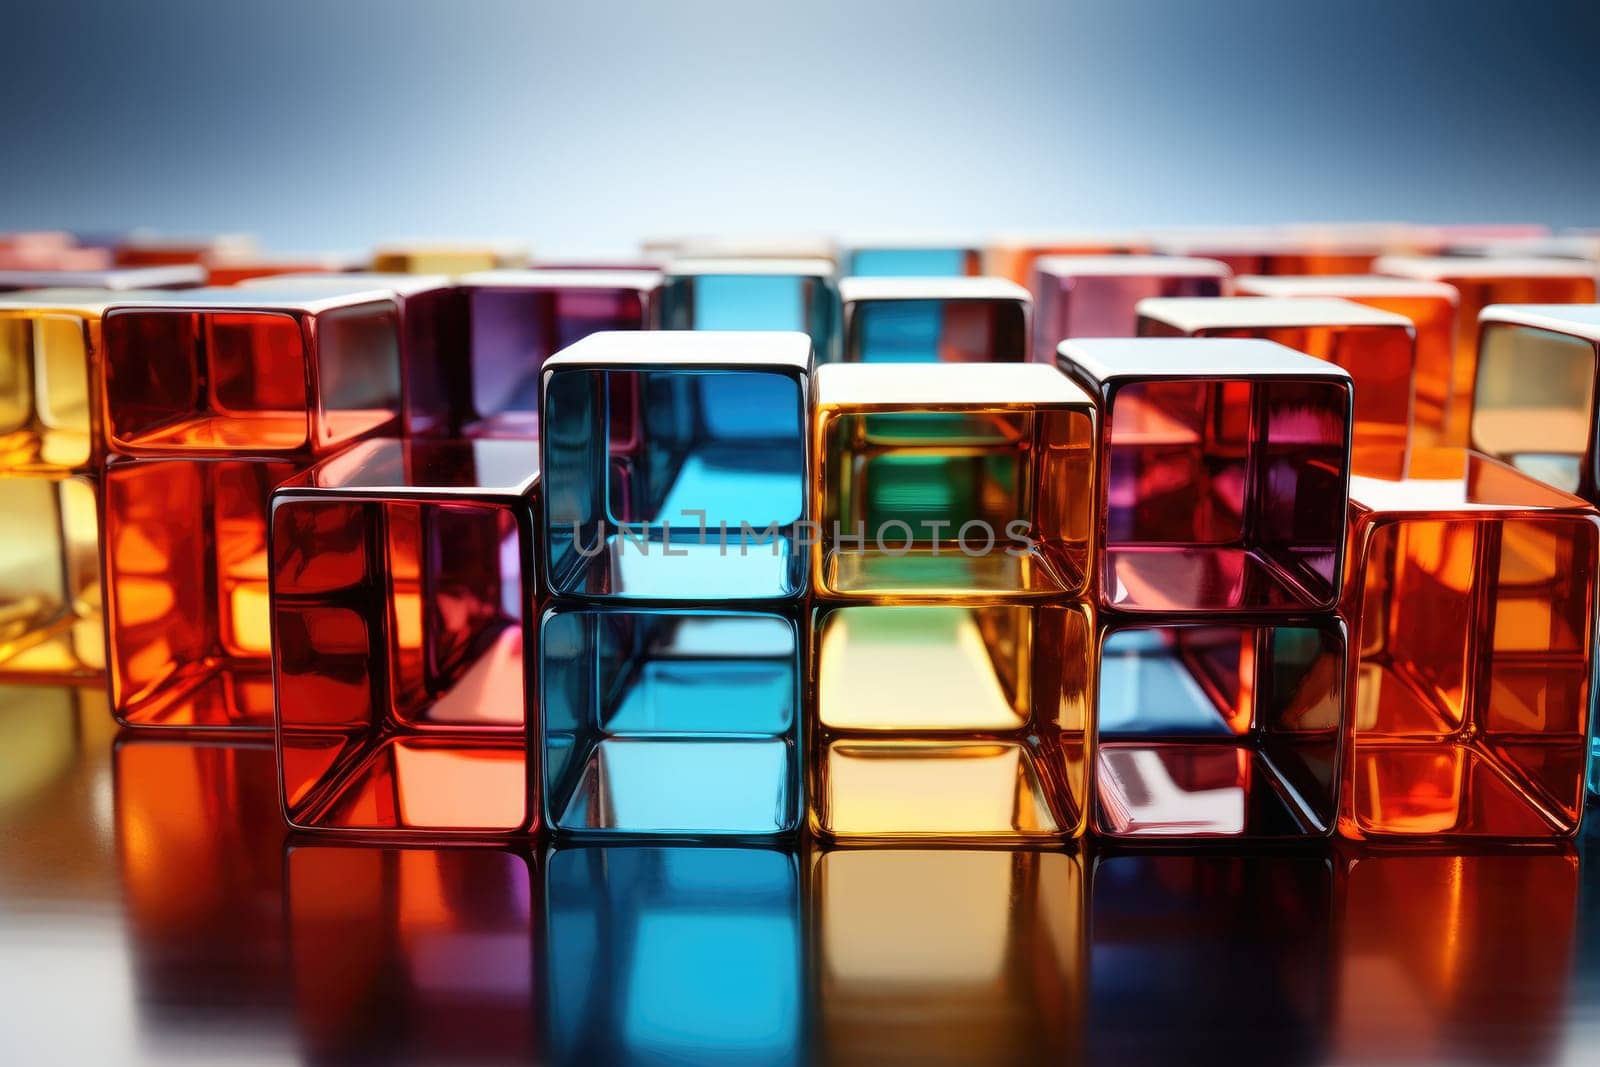 Vivid Abstract Background Composed of Multicolored Glass Cubes in Diverse Hues and Patterns by Yurich32